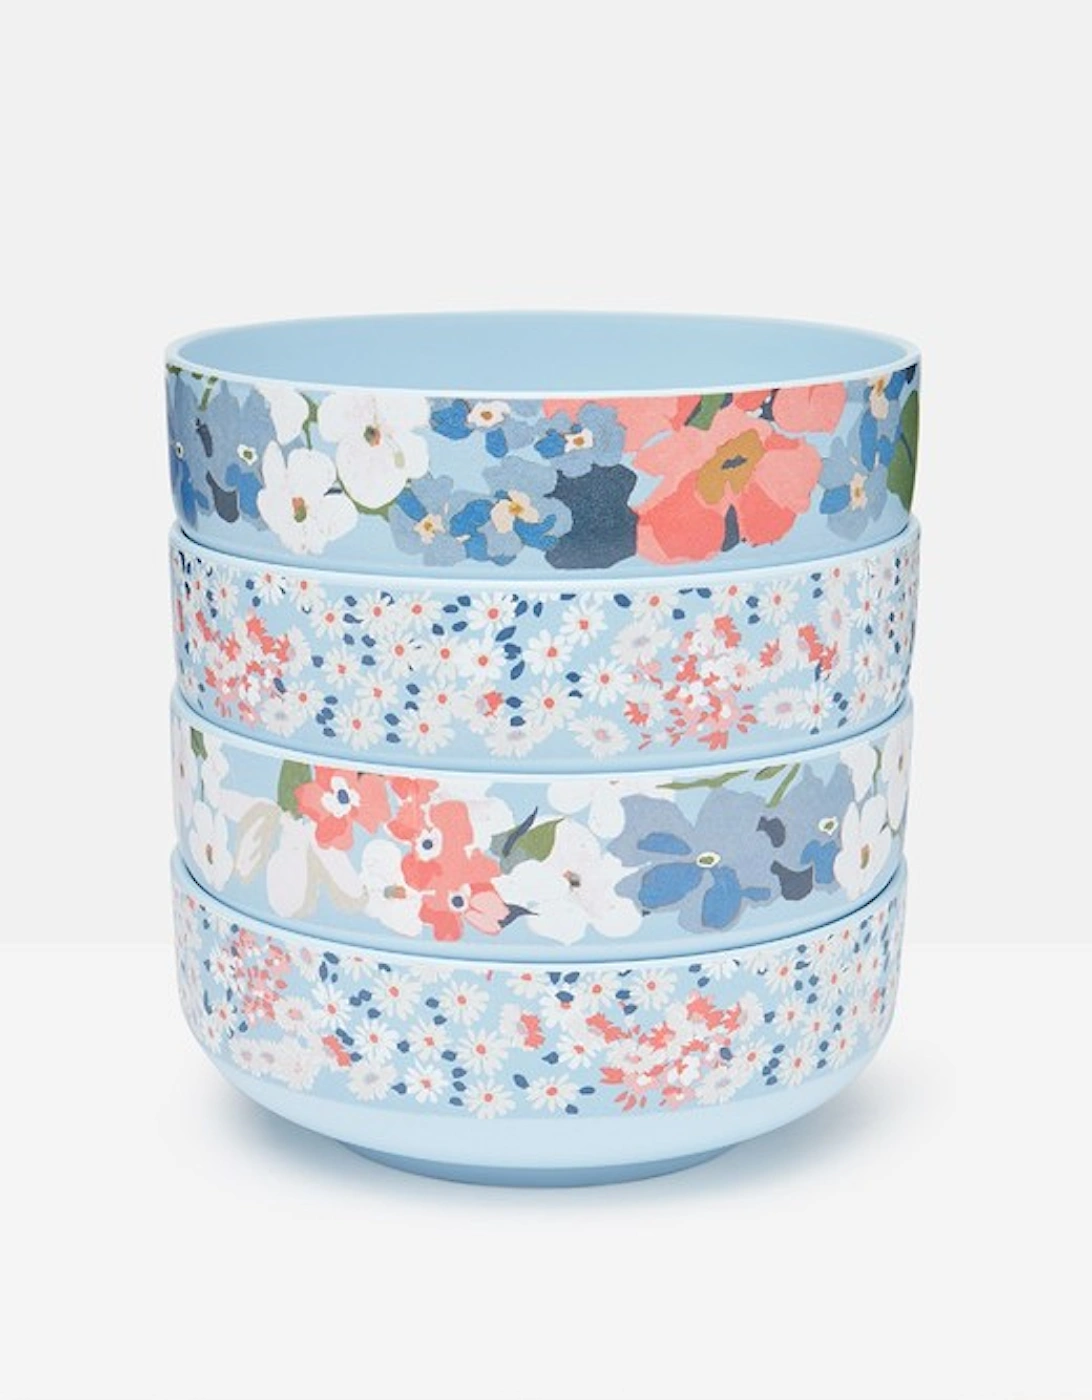 Outdoor Cereal Bowl Blue Floral Pack Of Four